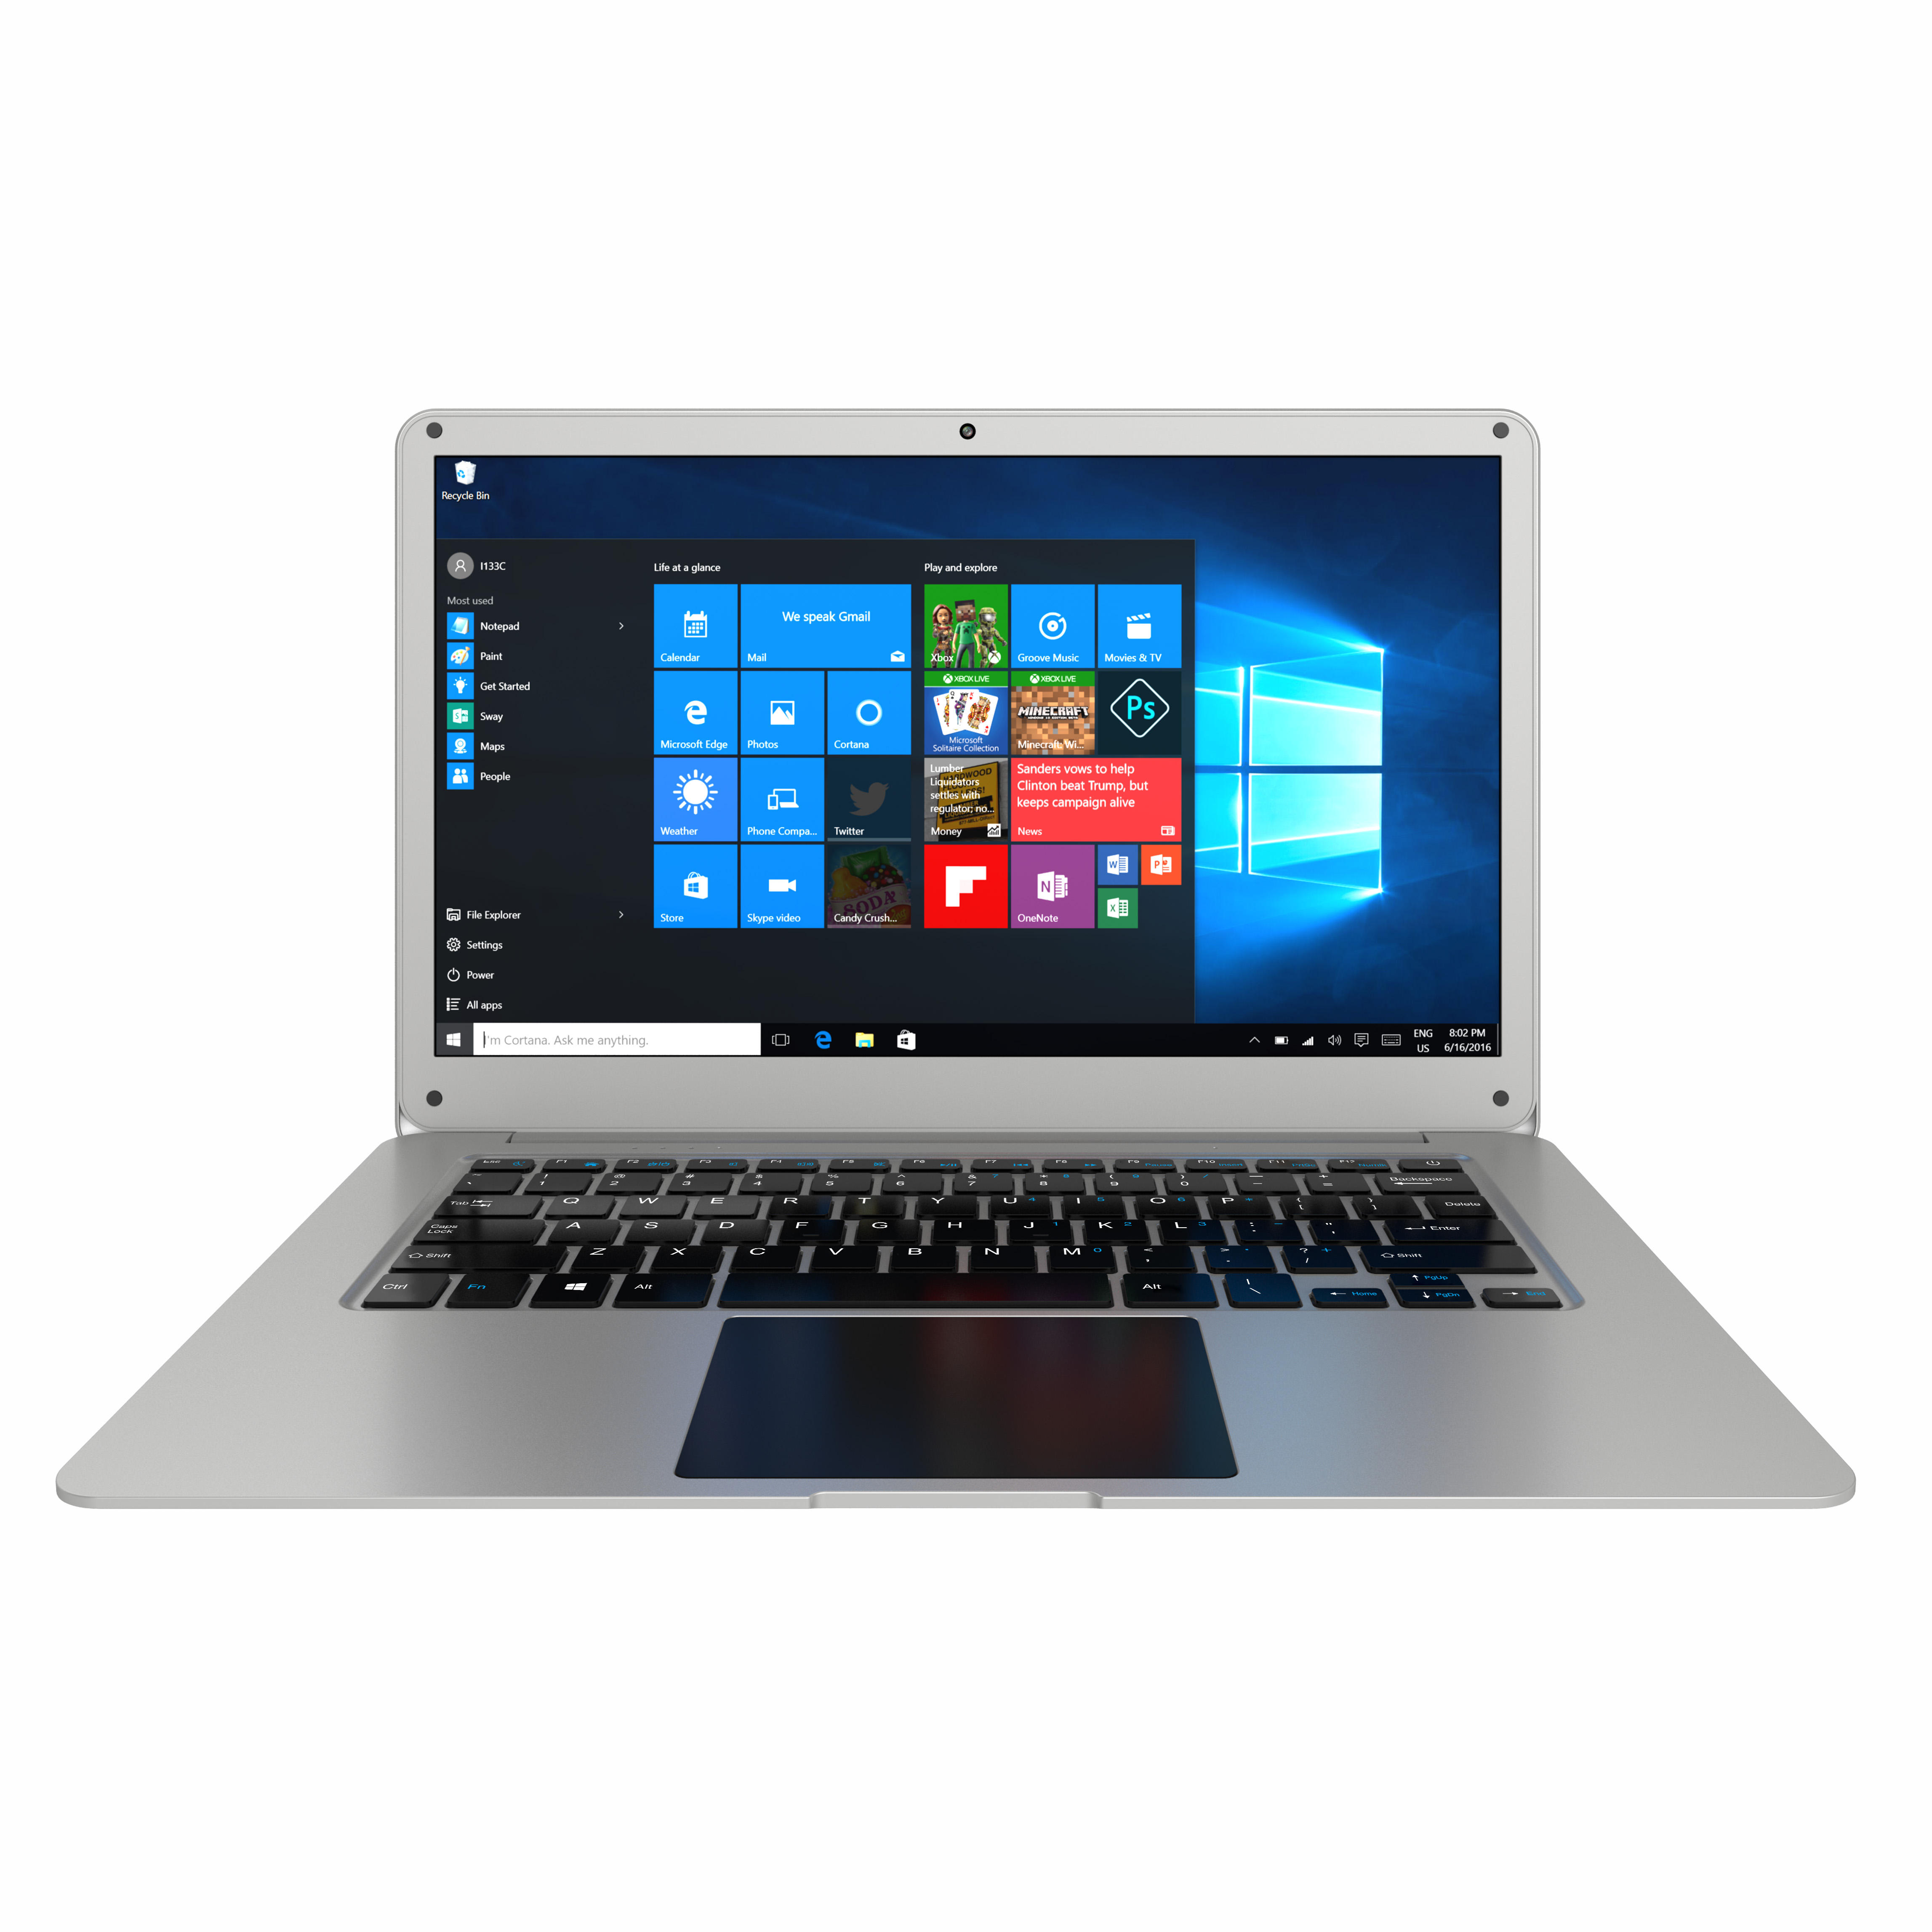 best price,great,wall,w1333a,4/64gb,laptop,discount